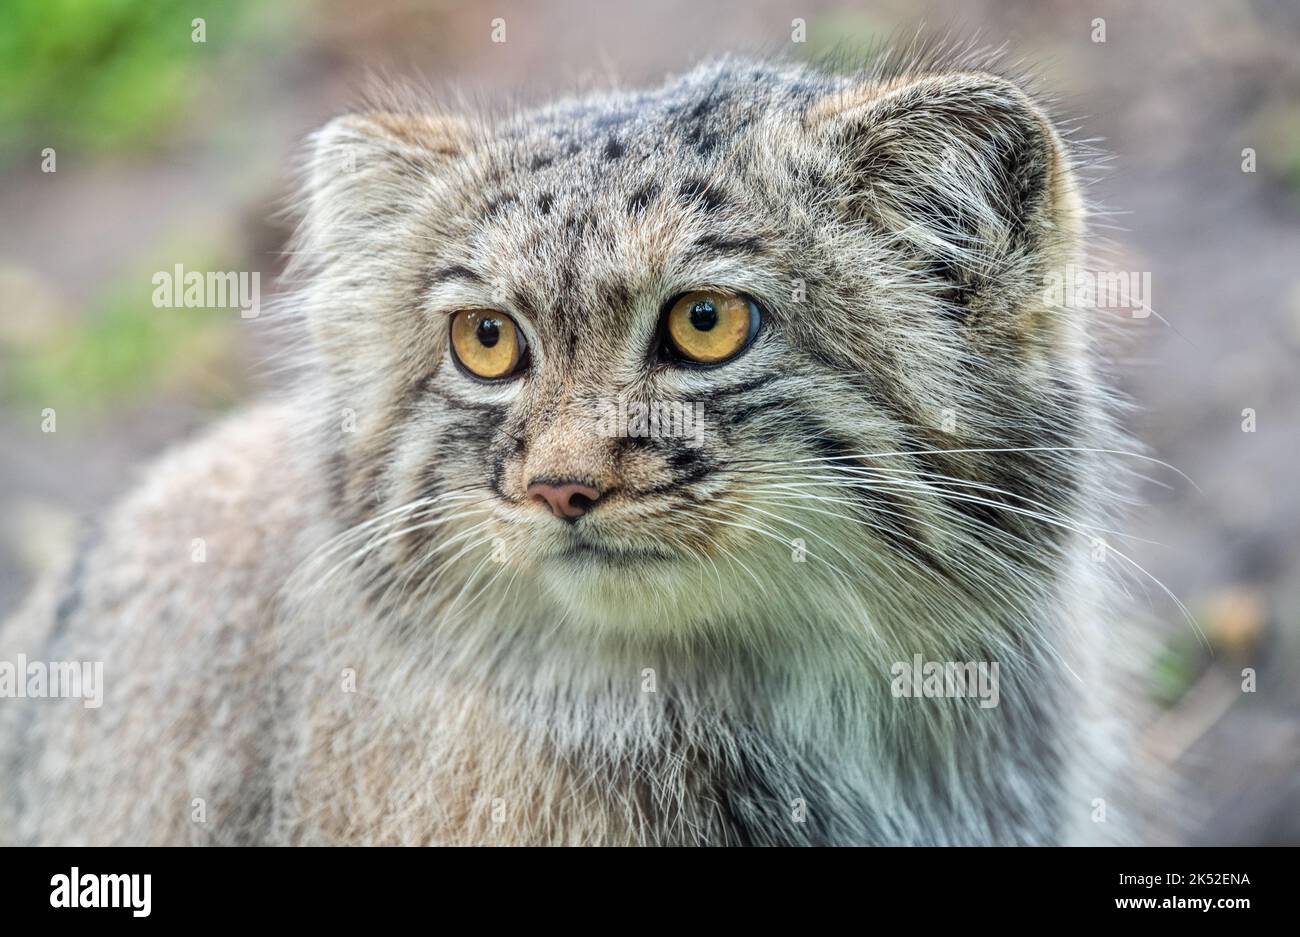 Pallas's cat (Otocolobus manul), also known as manul. Close-up portrait photo. Manul is a small wild cat with long and dense light grey fur. To date, Stock Photo